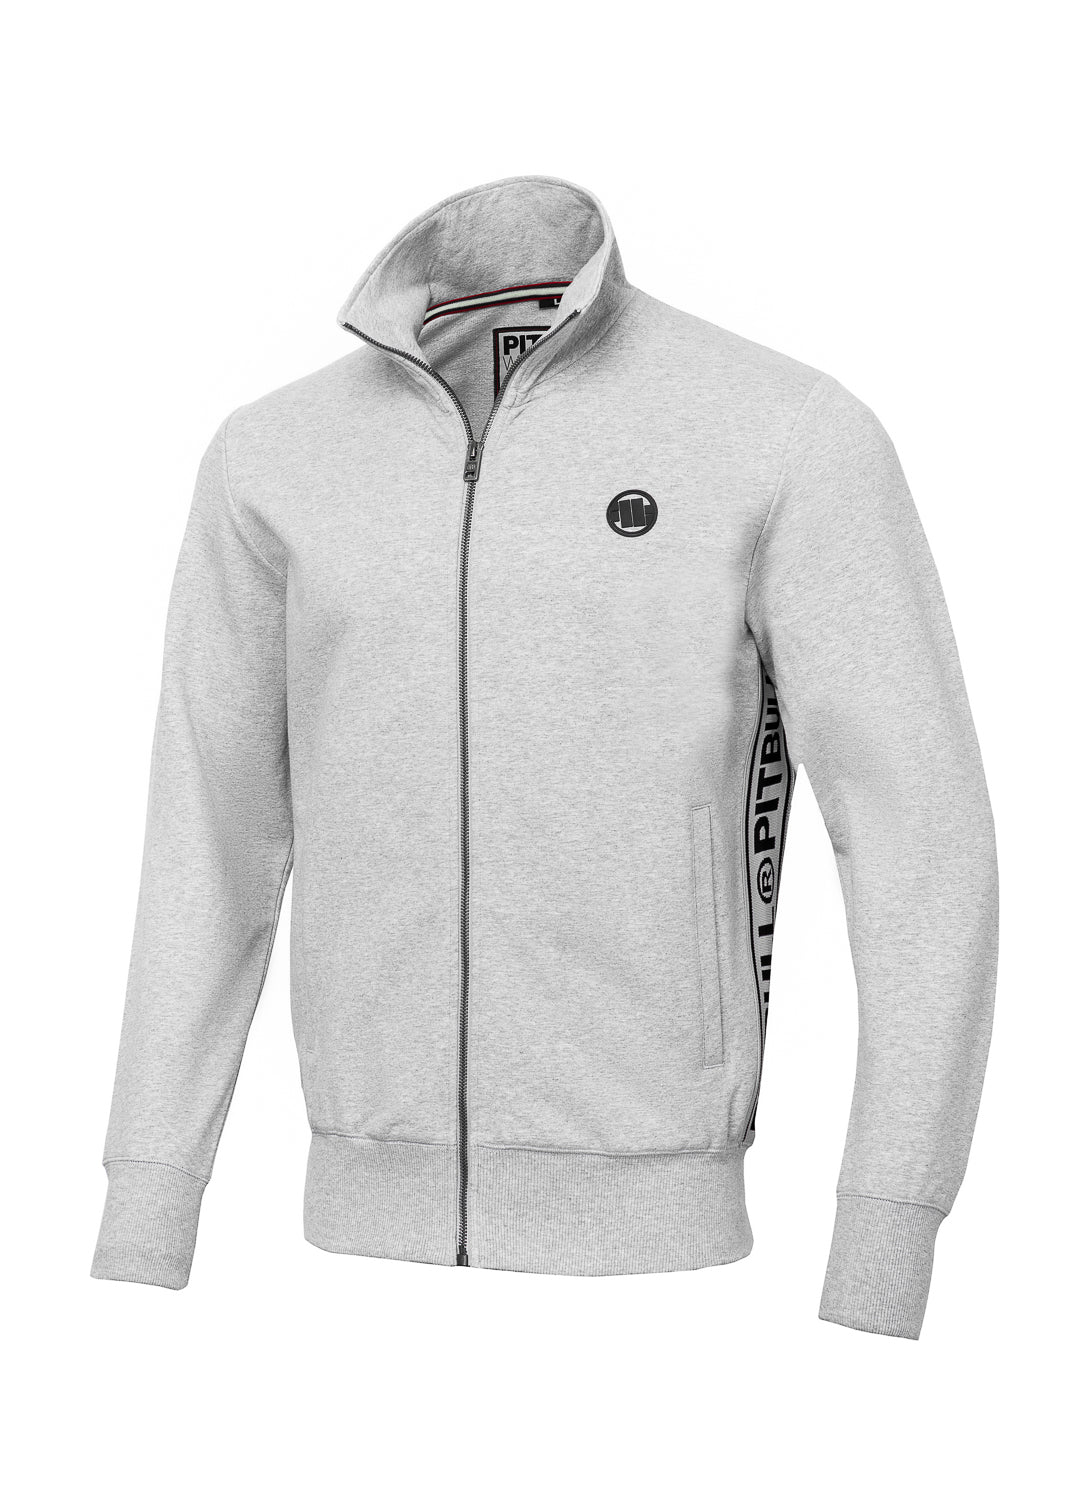 Sweatjacket French Terry VETTER Grey